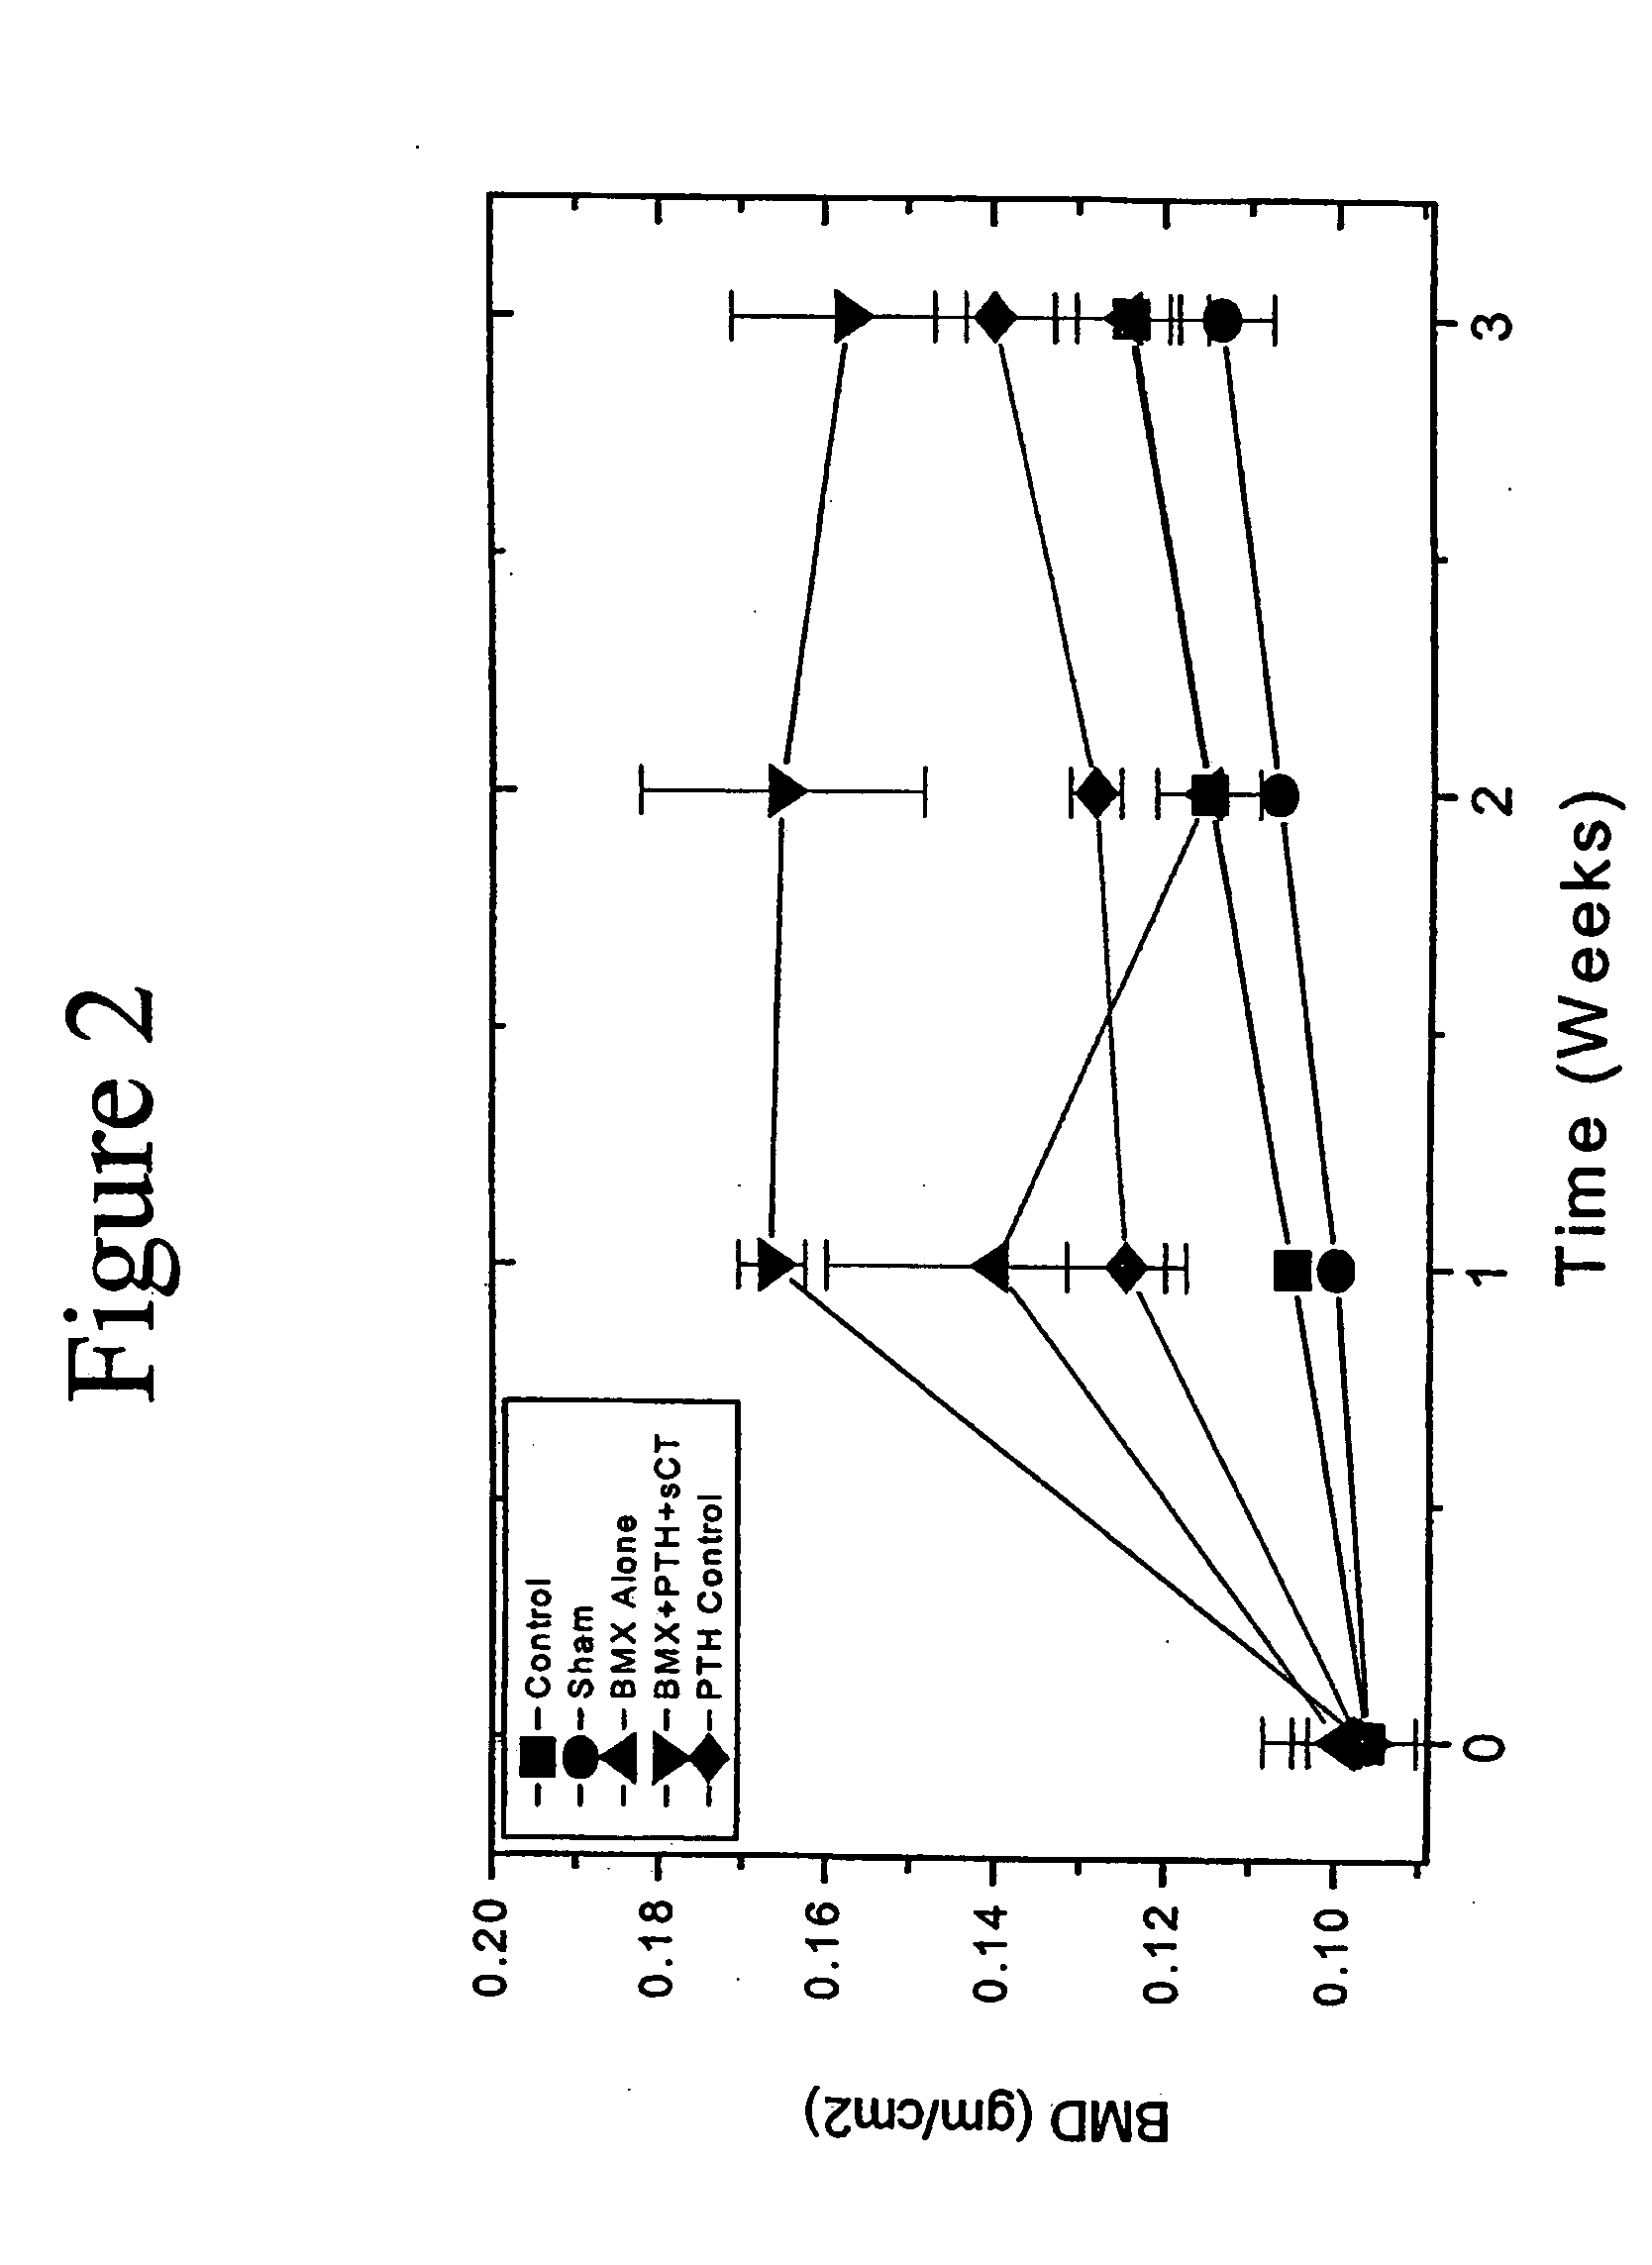 Method for fostering bone formation and preservation